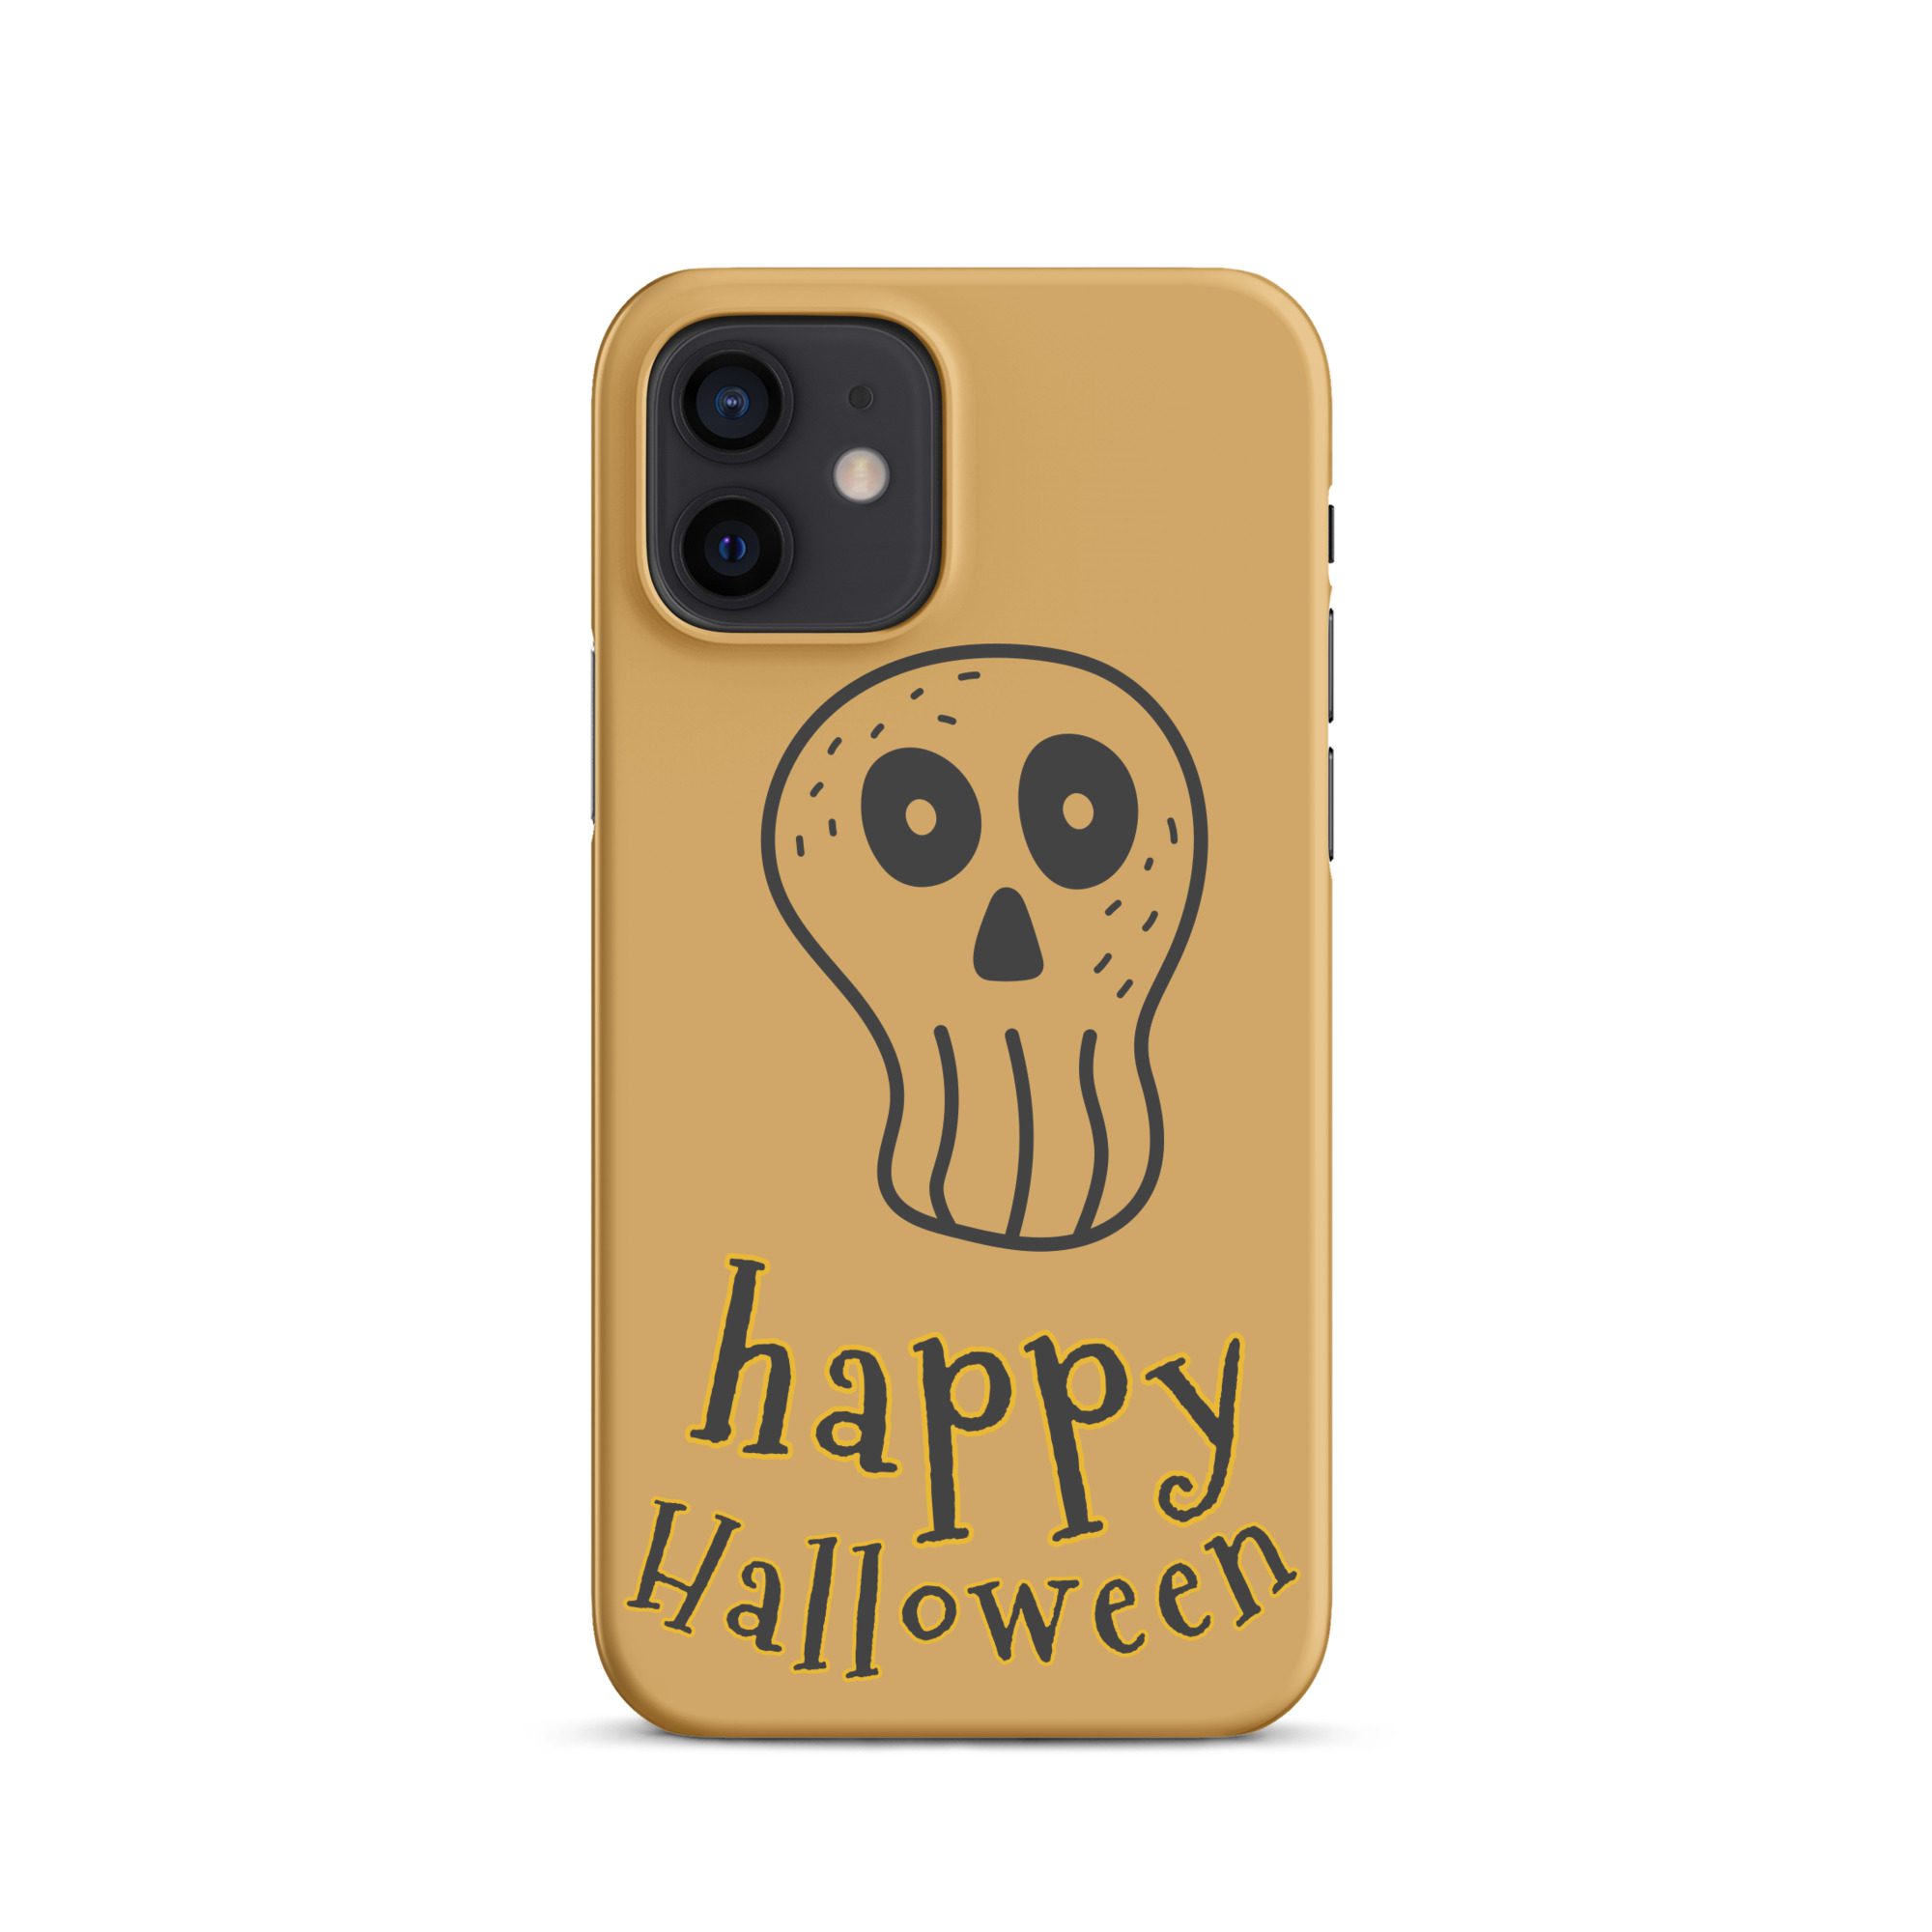 snap case for iphone matte iphone 12 front 6516d1684b637